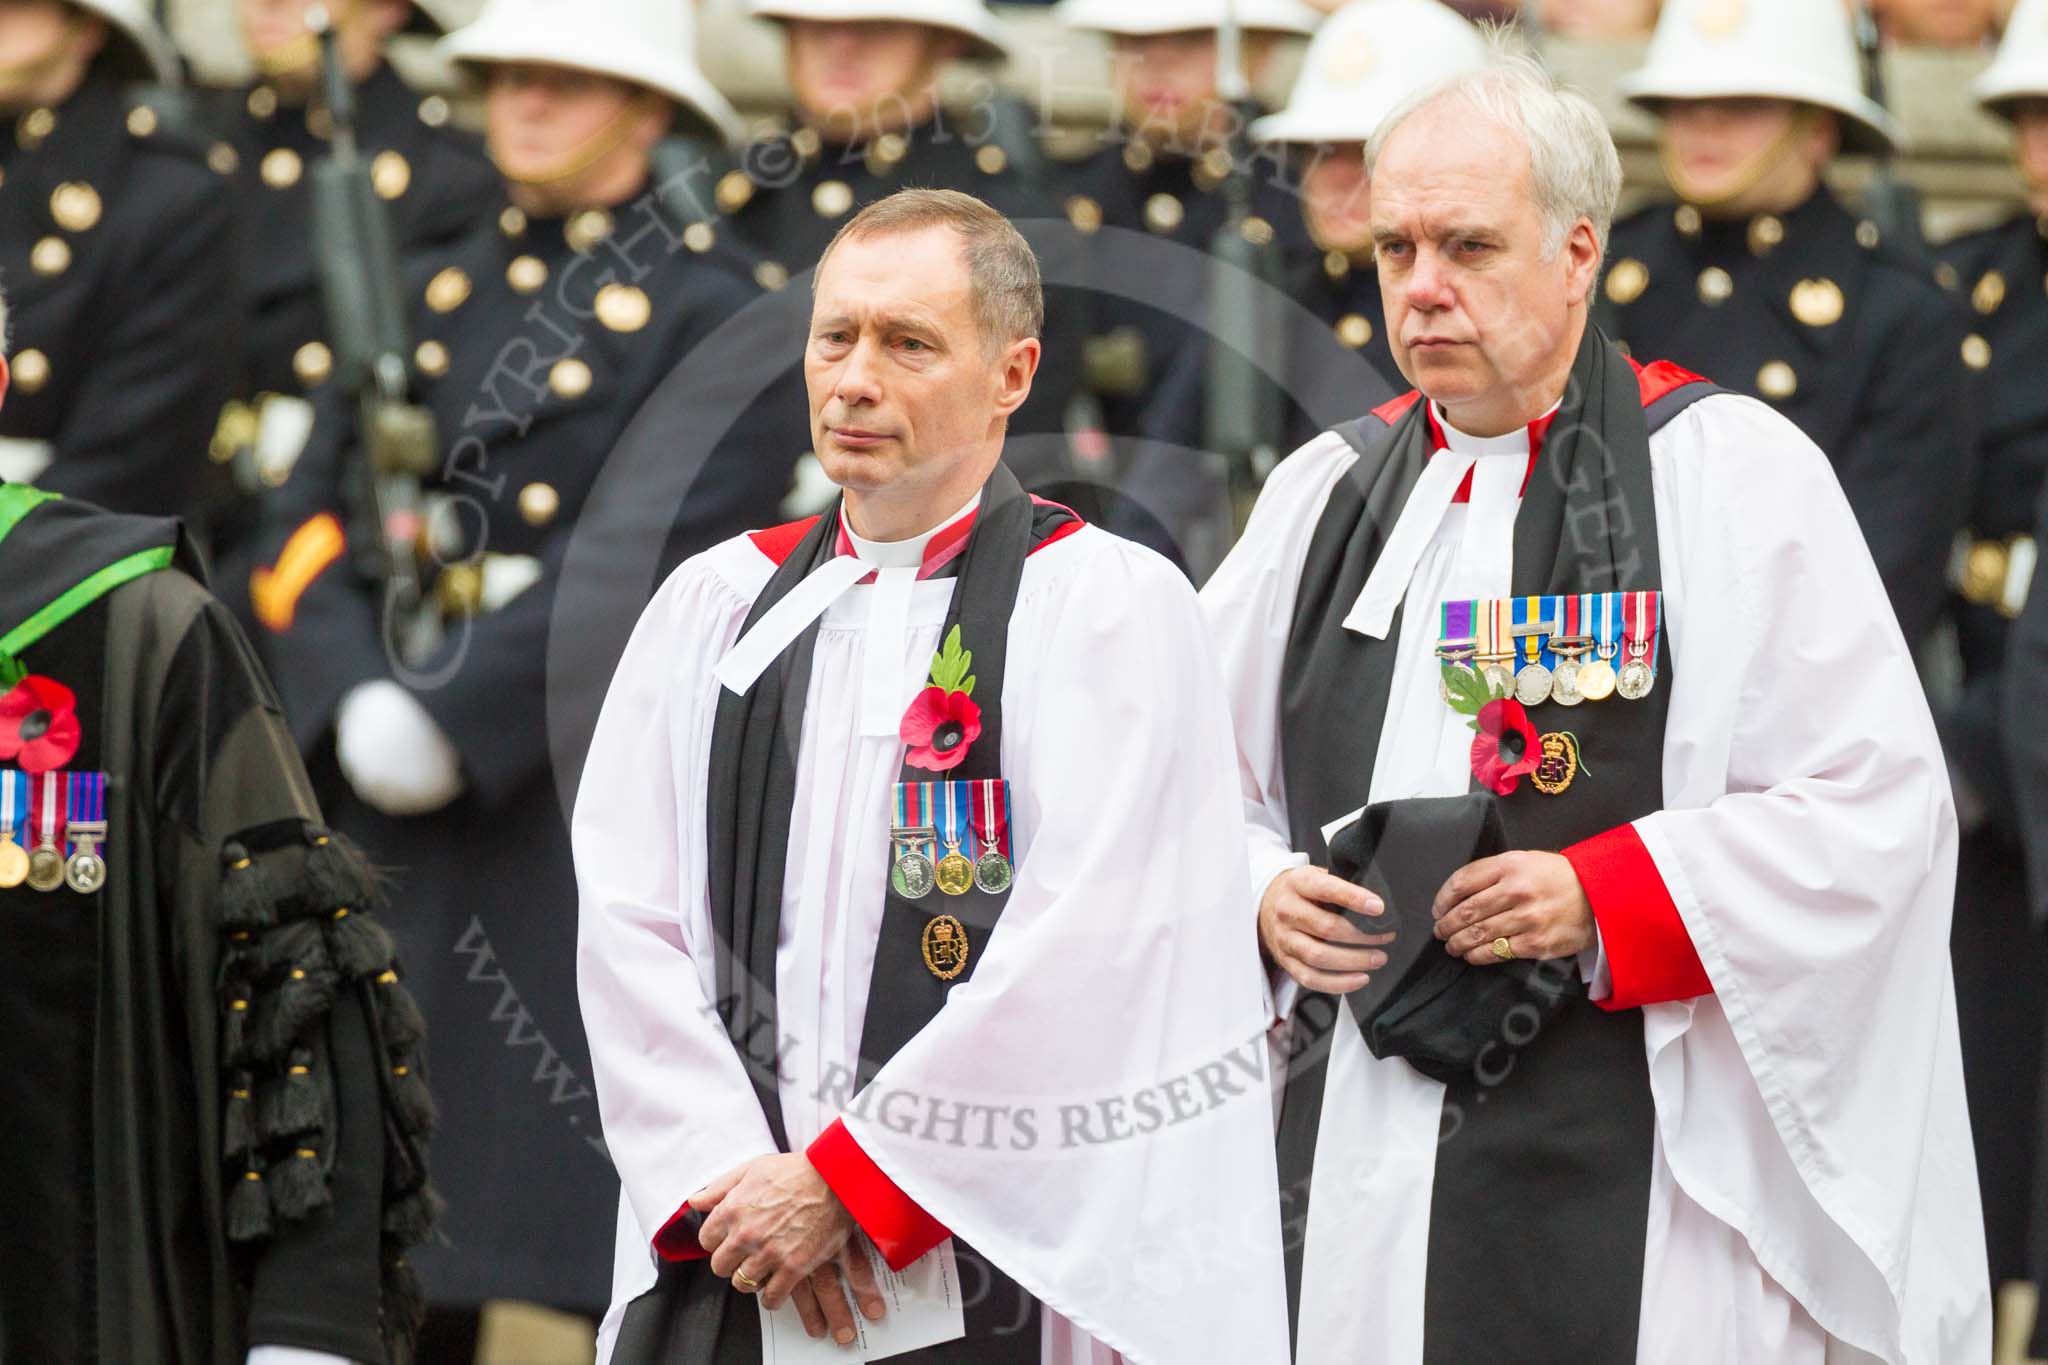 Remembrance Sunday at the Cenotaph 2015: The Chaplain-in-Chief of the RAF, The Venerable (Air Vice Marshal) Jonathan Chaffey QHC RAF and the Sub-Dean of Her Majesty's Chapels Royal, the Reverend Canon Paul Wright. Image #84, 08 November 2015 10:54 Whitehall, London, UK